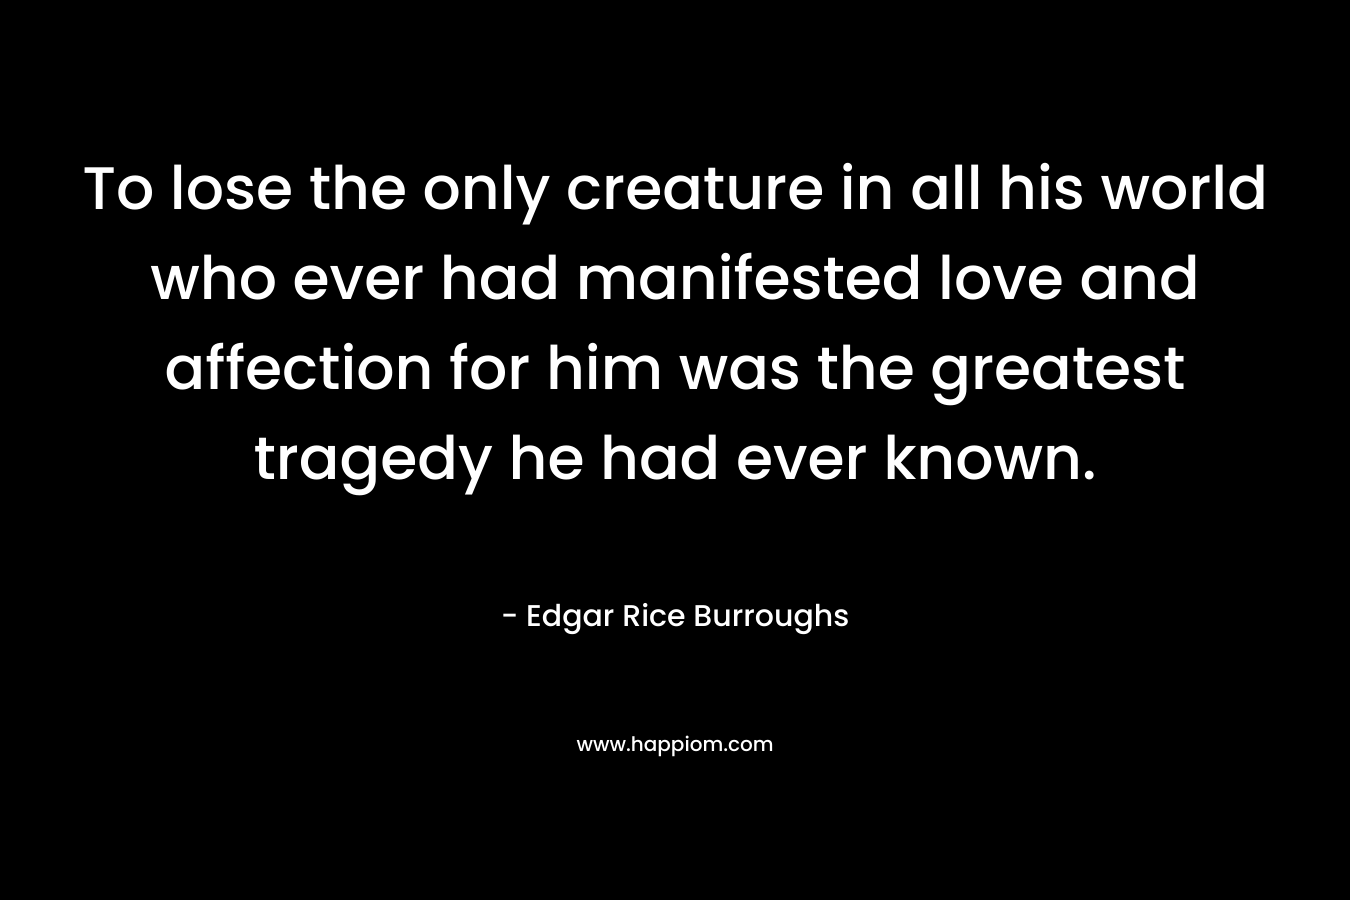 To lose the only creature in all his world who ever had manifested love and affection for him was the greatest tragedy he had ever known.